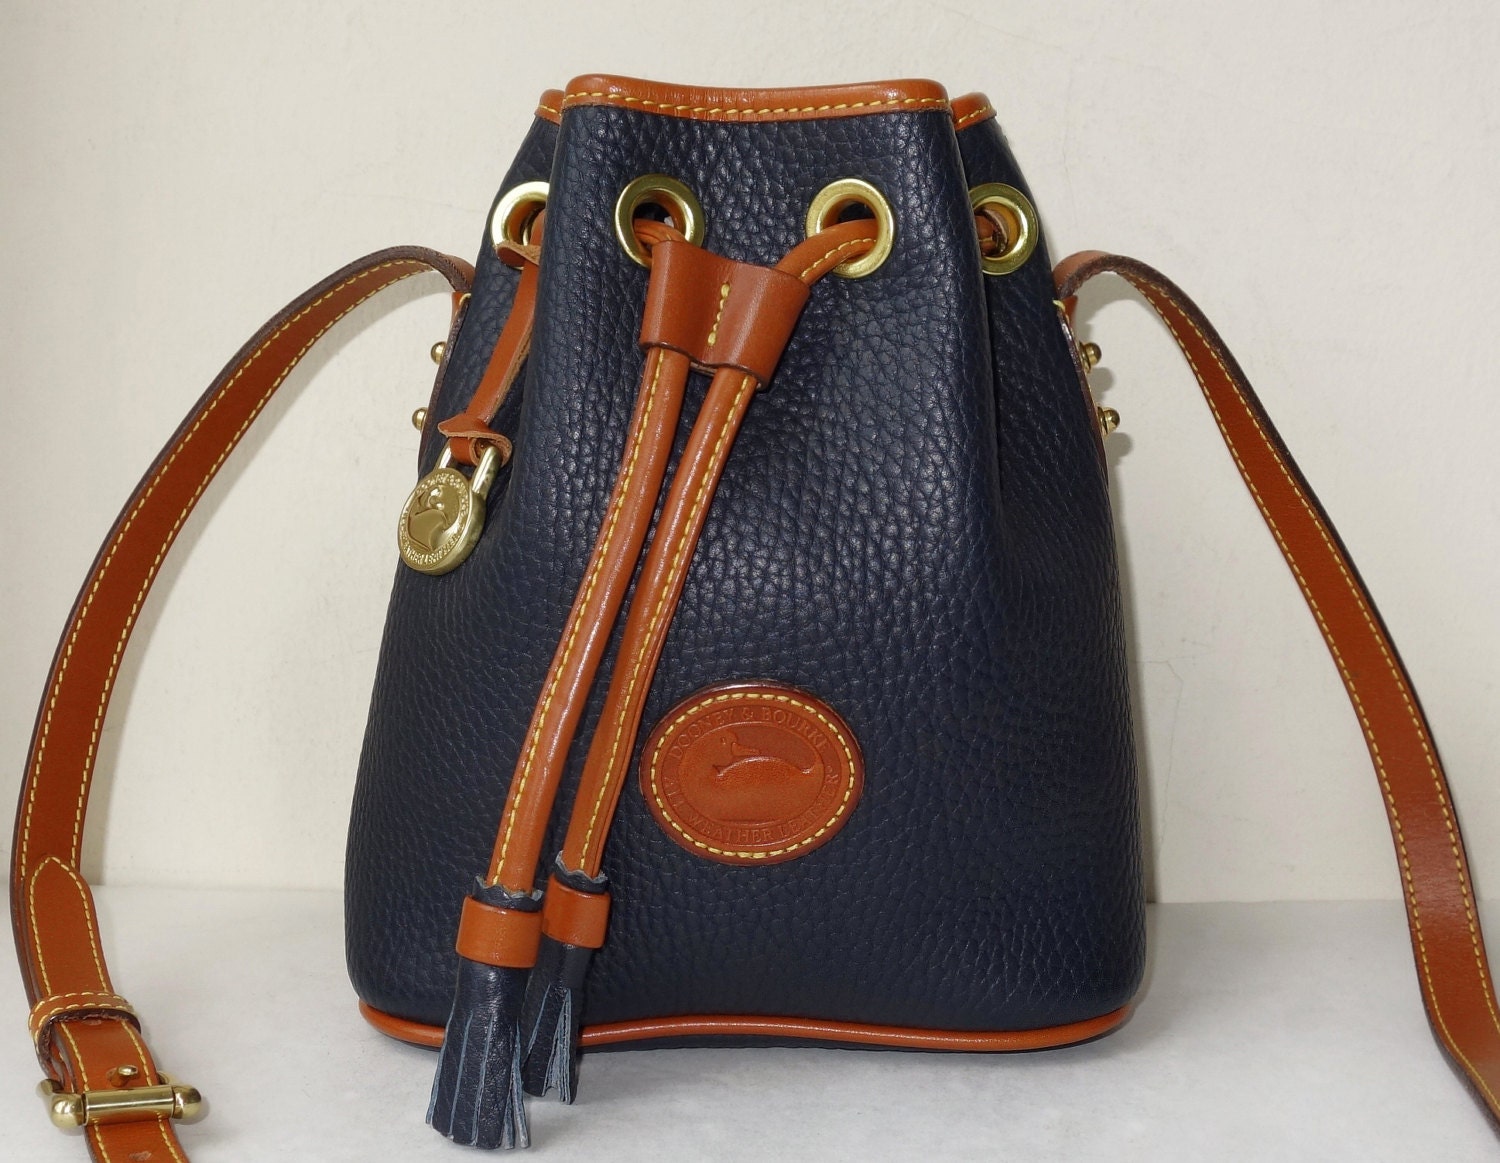 Vintage Mint Dooney & Bourke Navy Blue and Tan Brown Leather